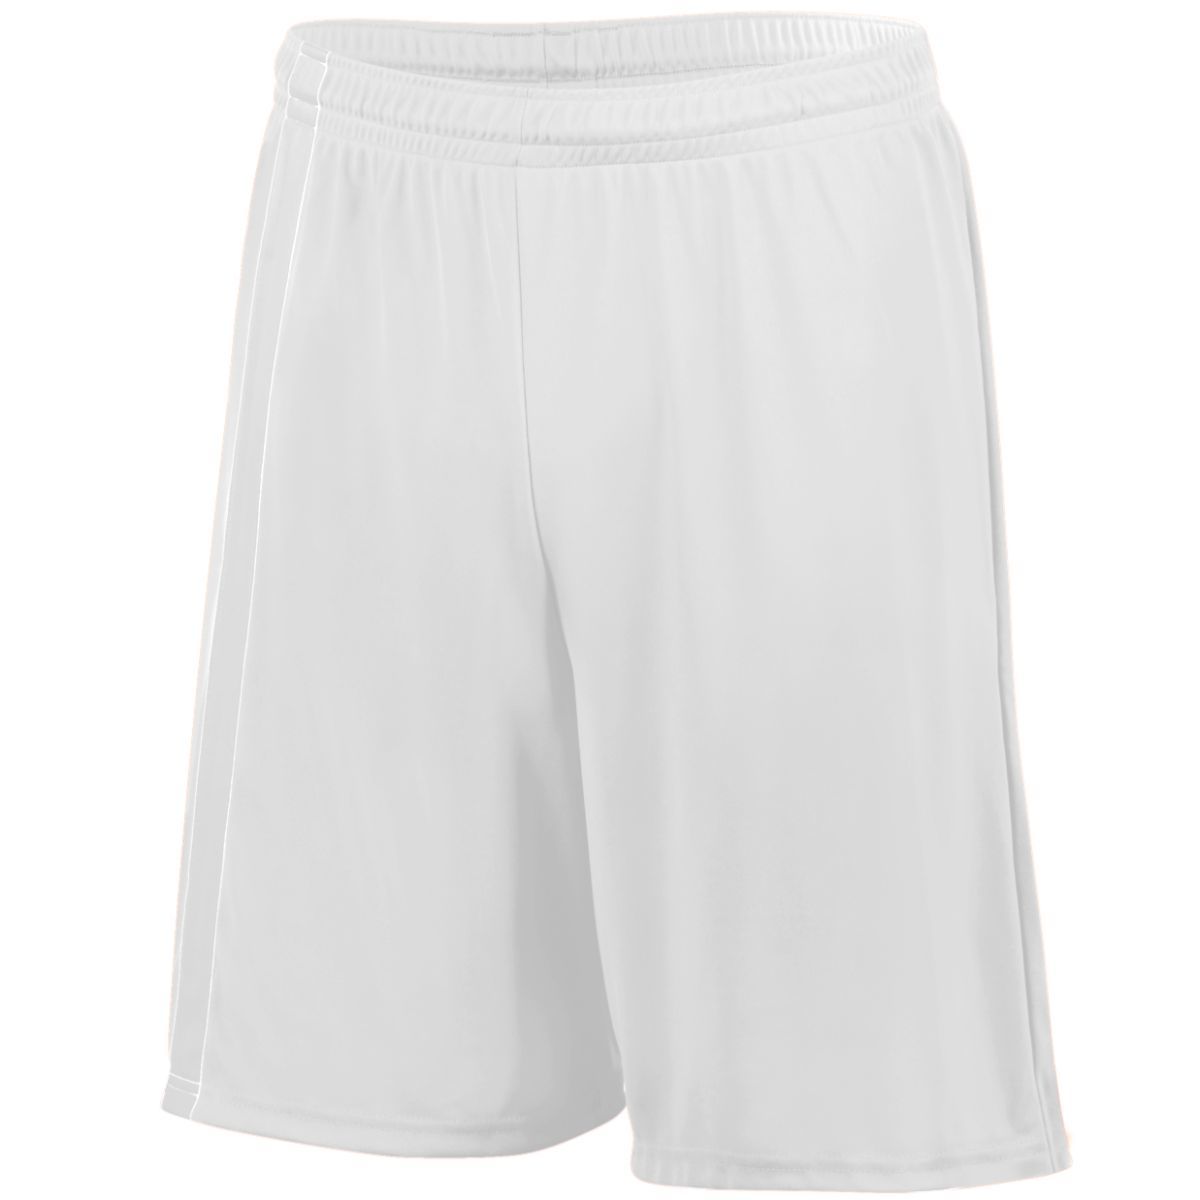 Augusta Sportswear Youth Attacking Third Shorts in White/White  -Part of the Youth, Youth-Shorts, Augusta-Products, Soccer, All-Sports-1 product lines at KanaleyCreations.com